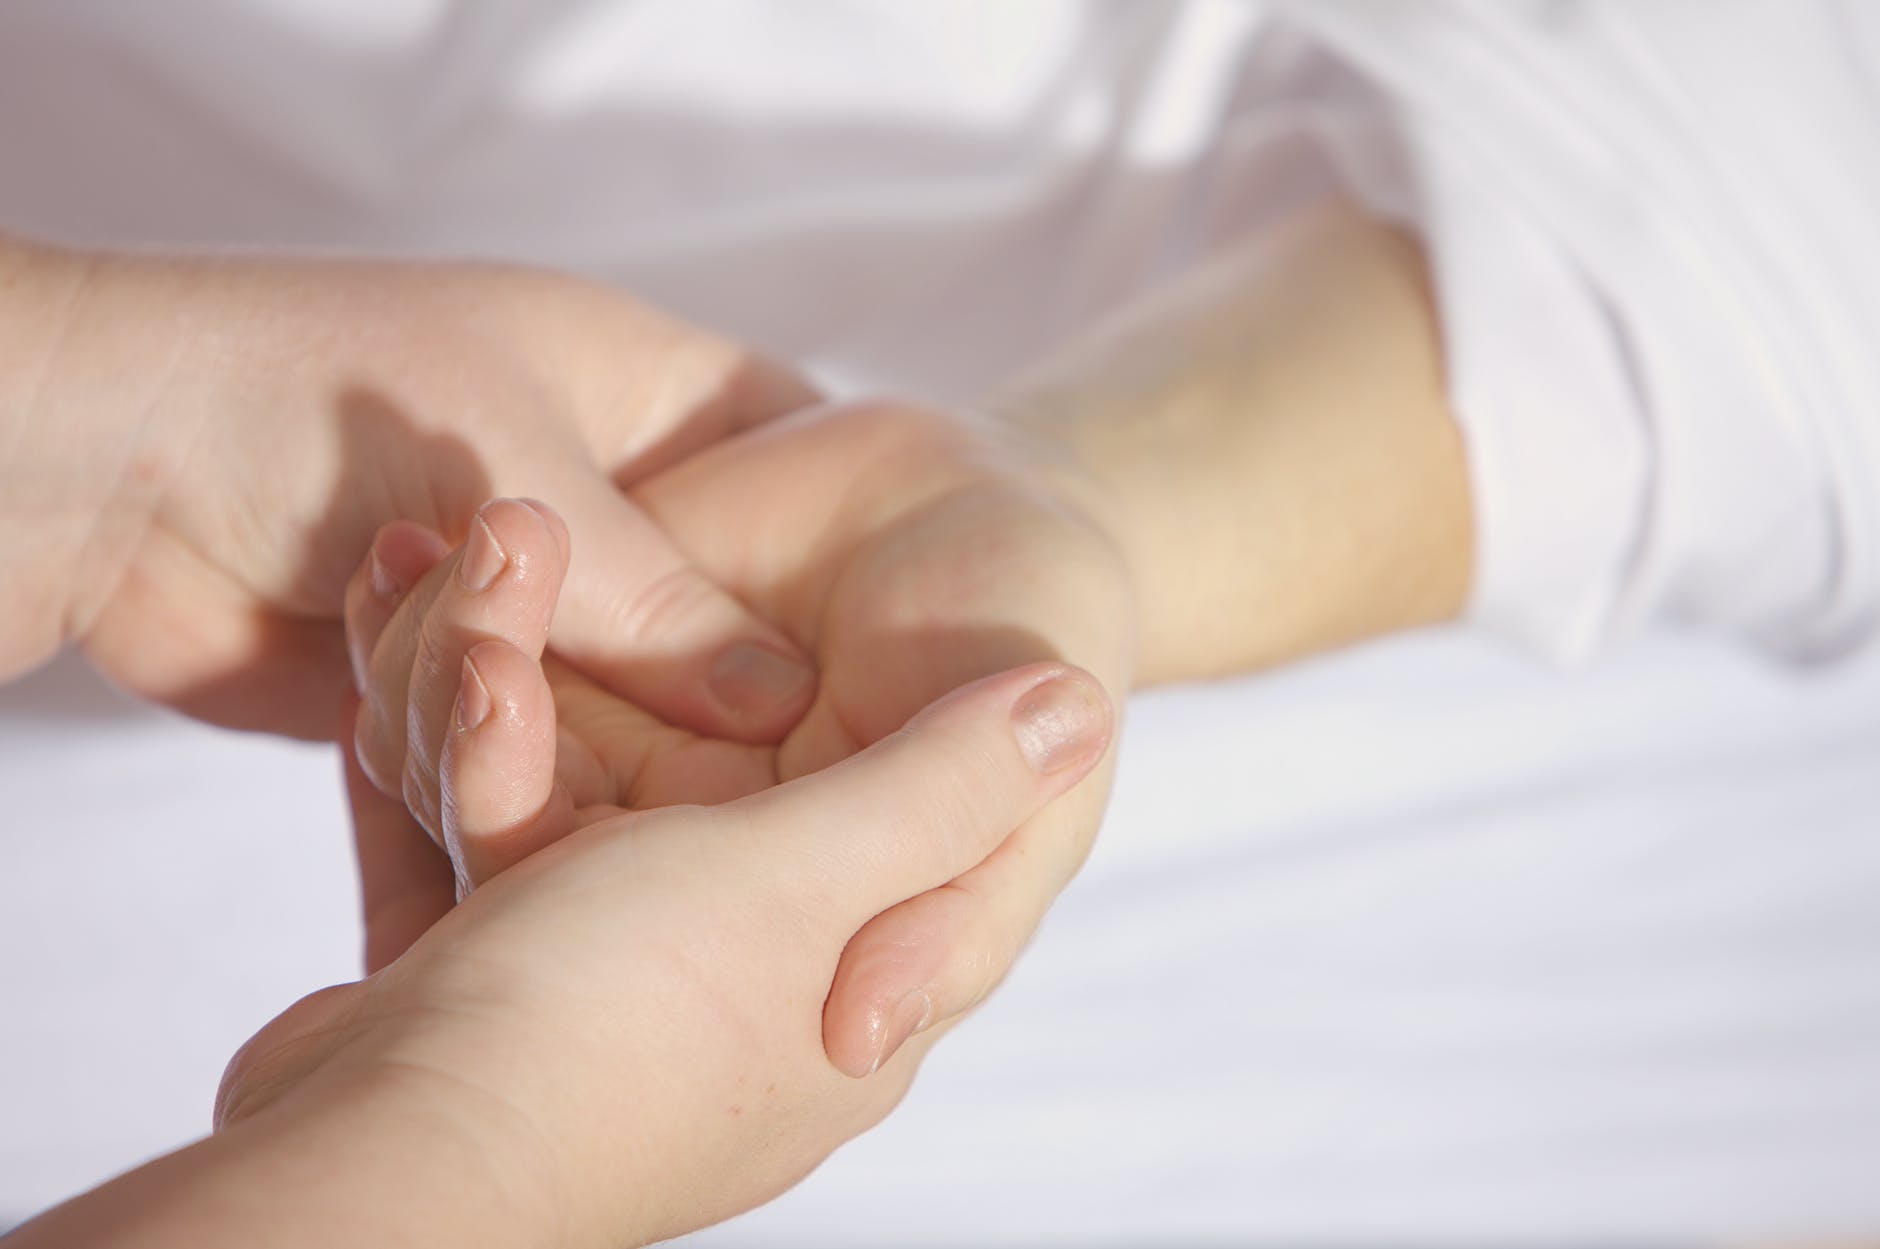 What are the benefits of hand massages?